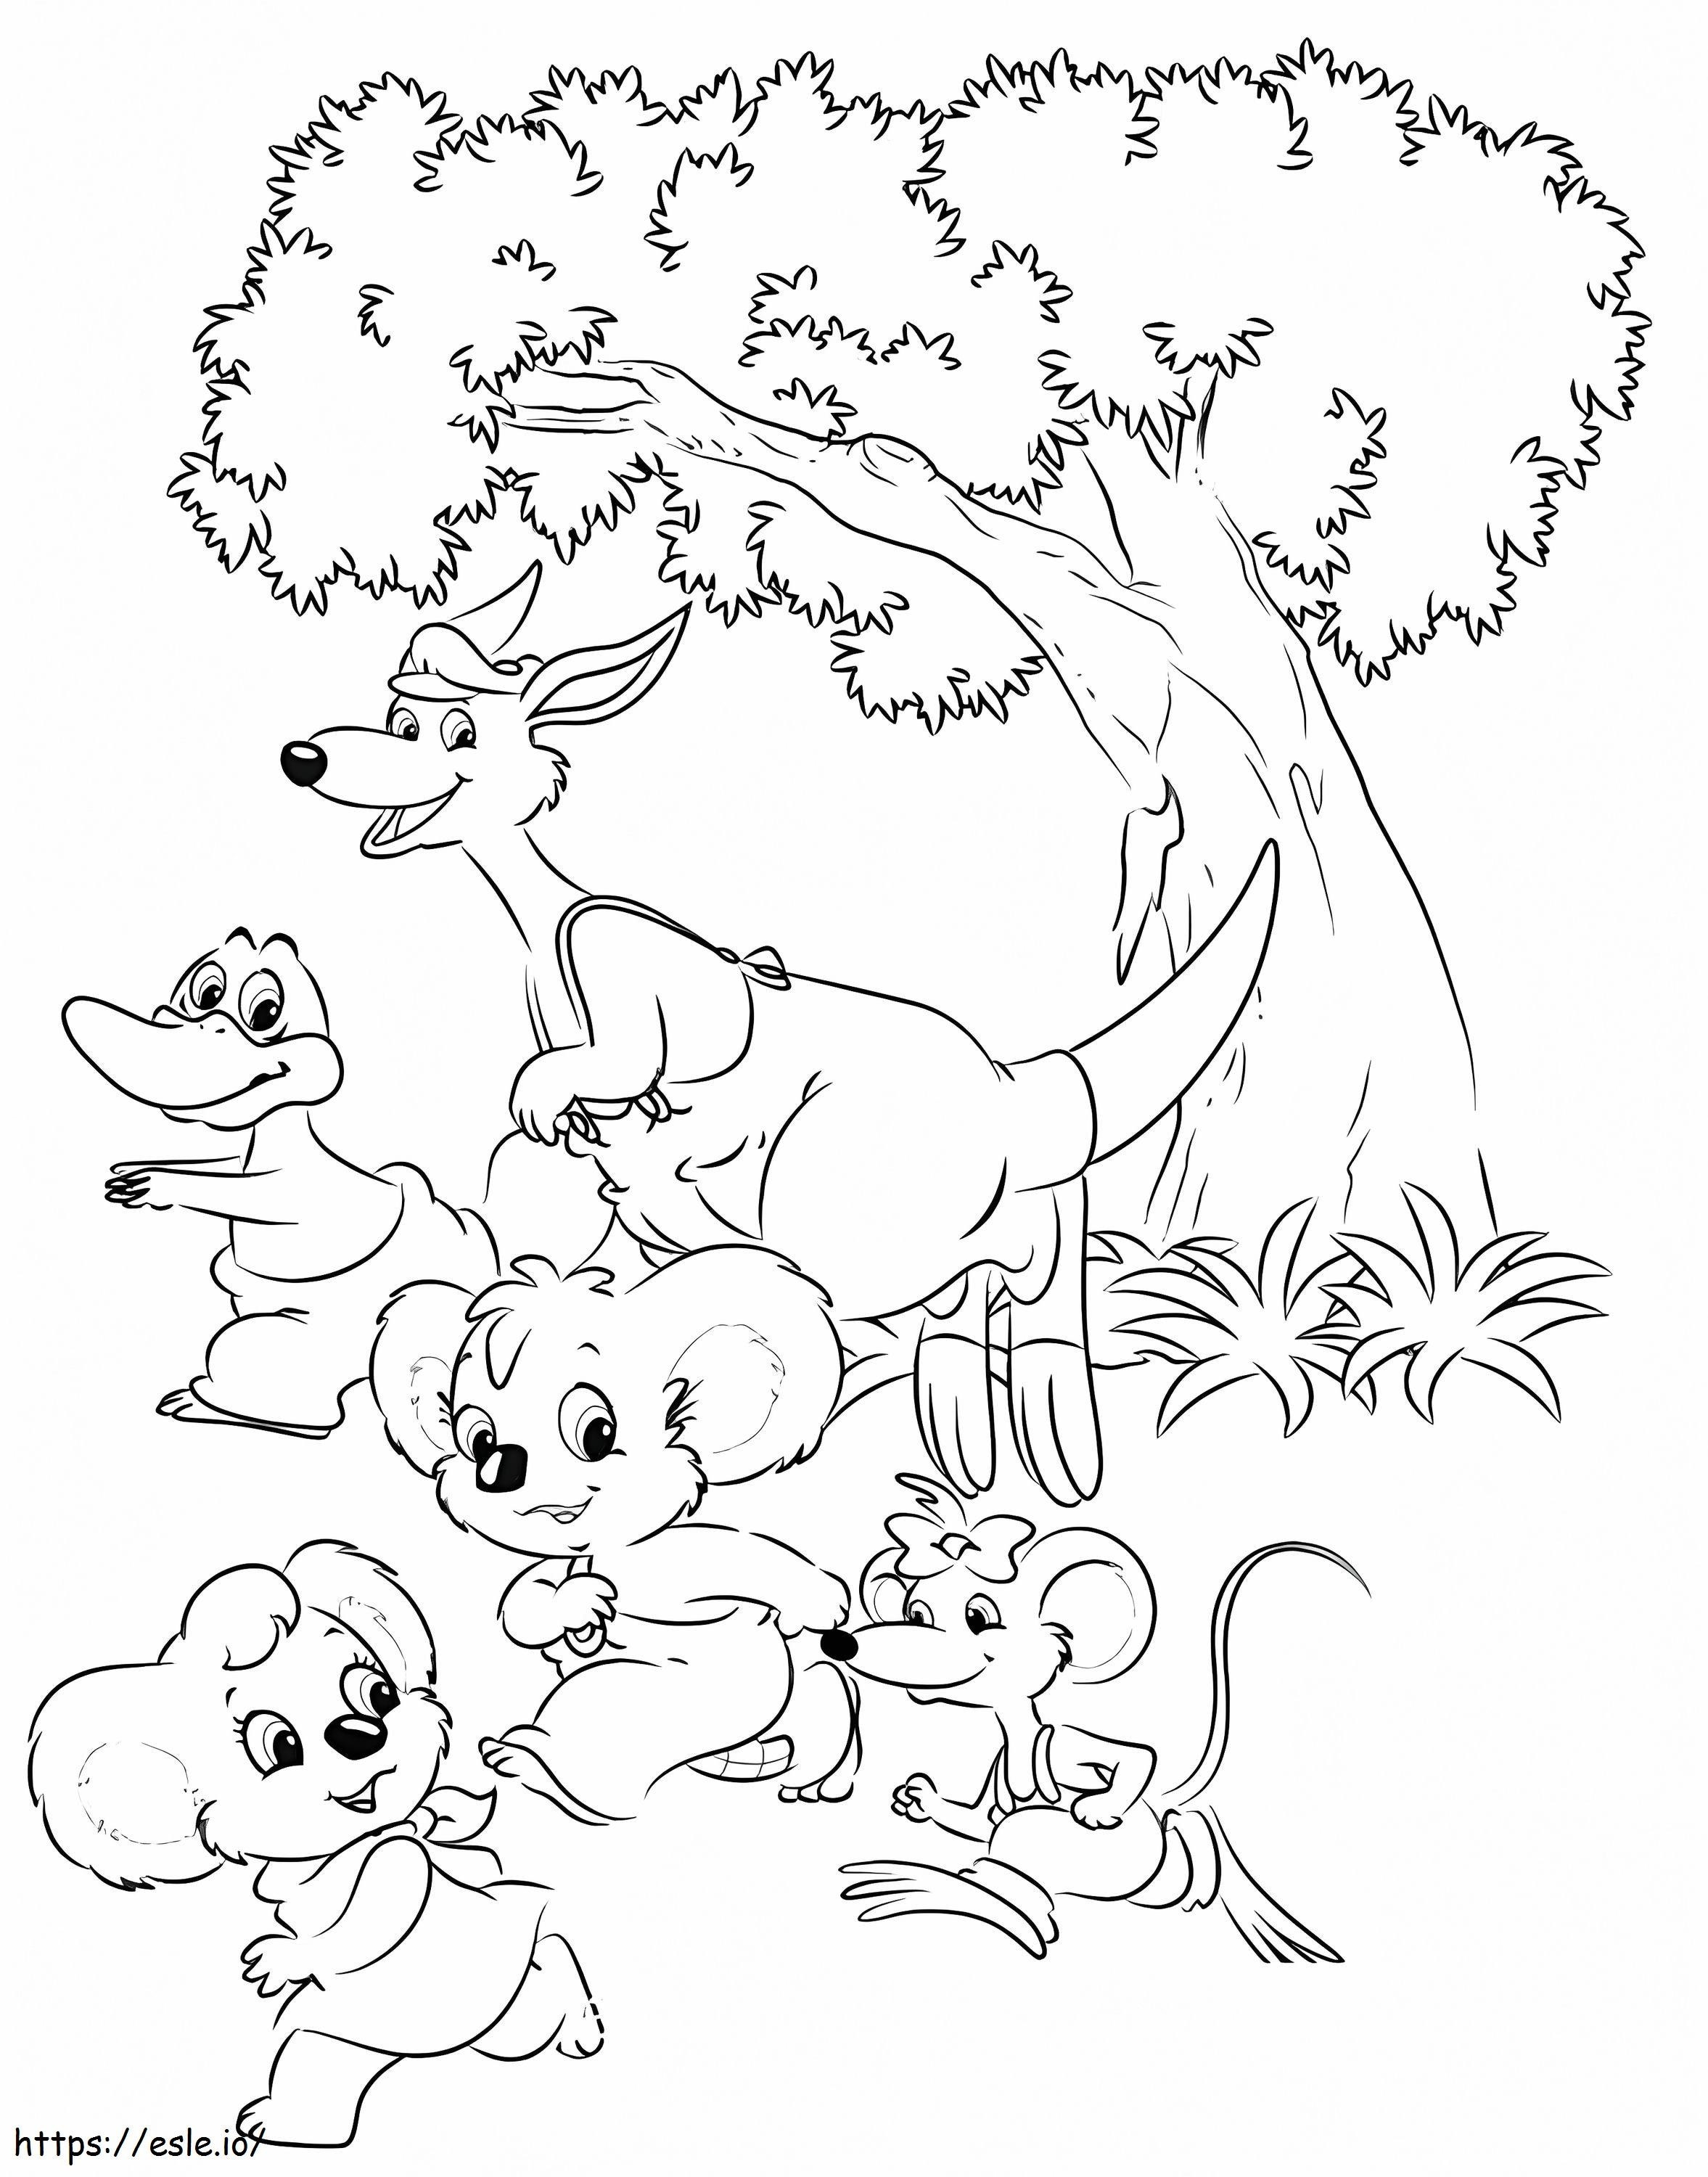 Blinky Bill Characters coloring page